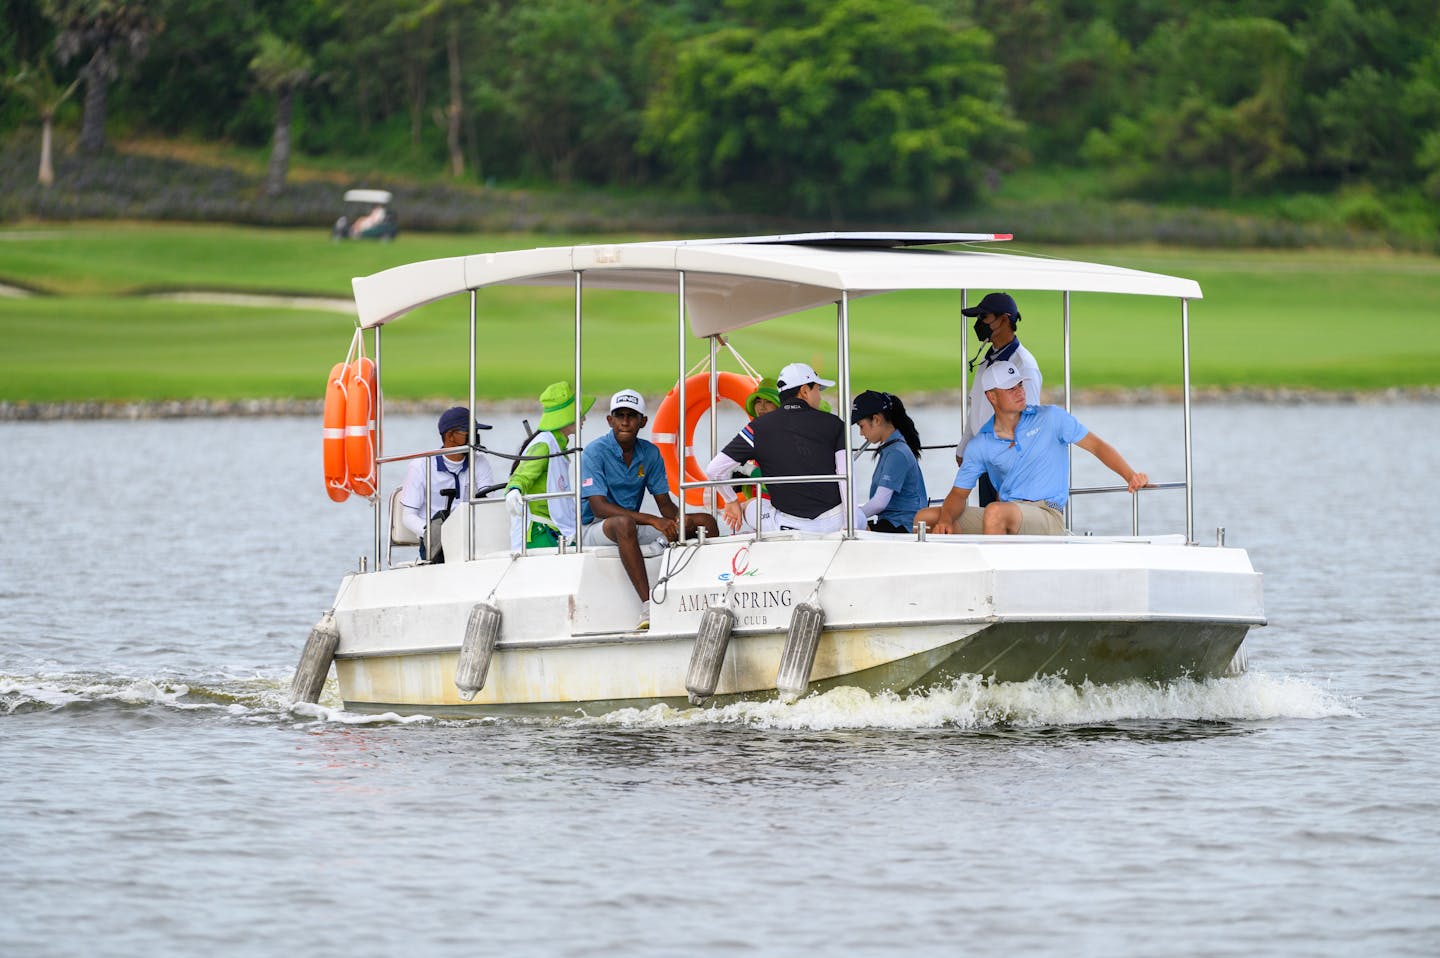 Boat is the only way to access the 17th green